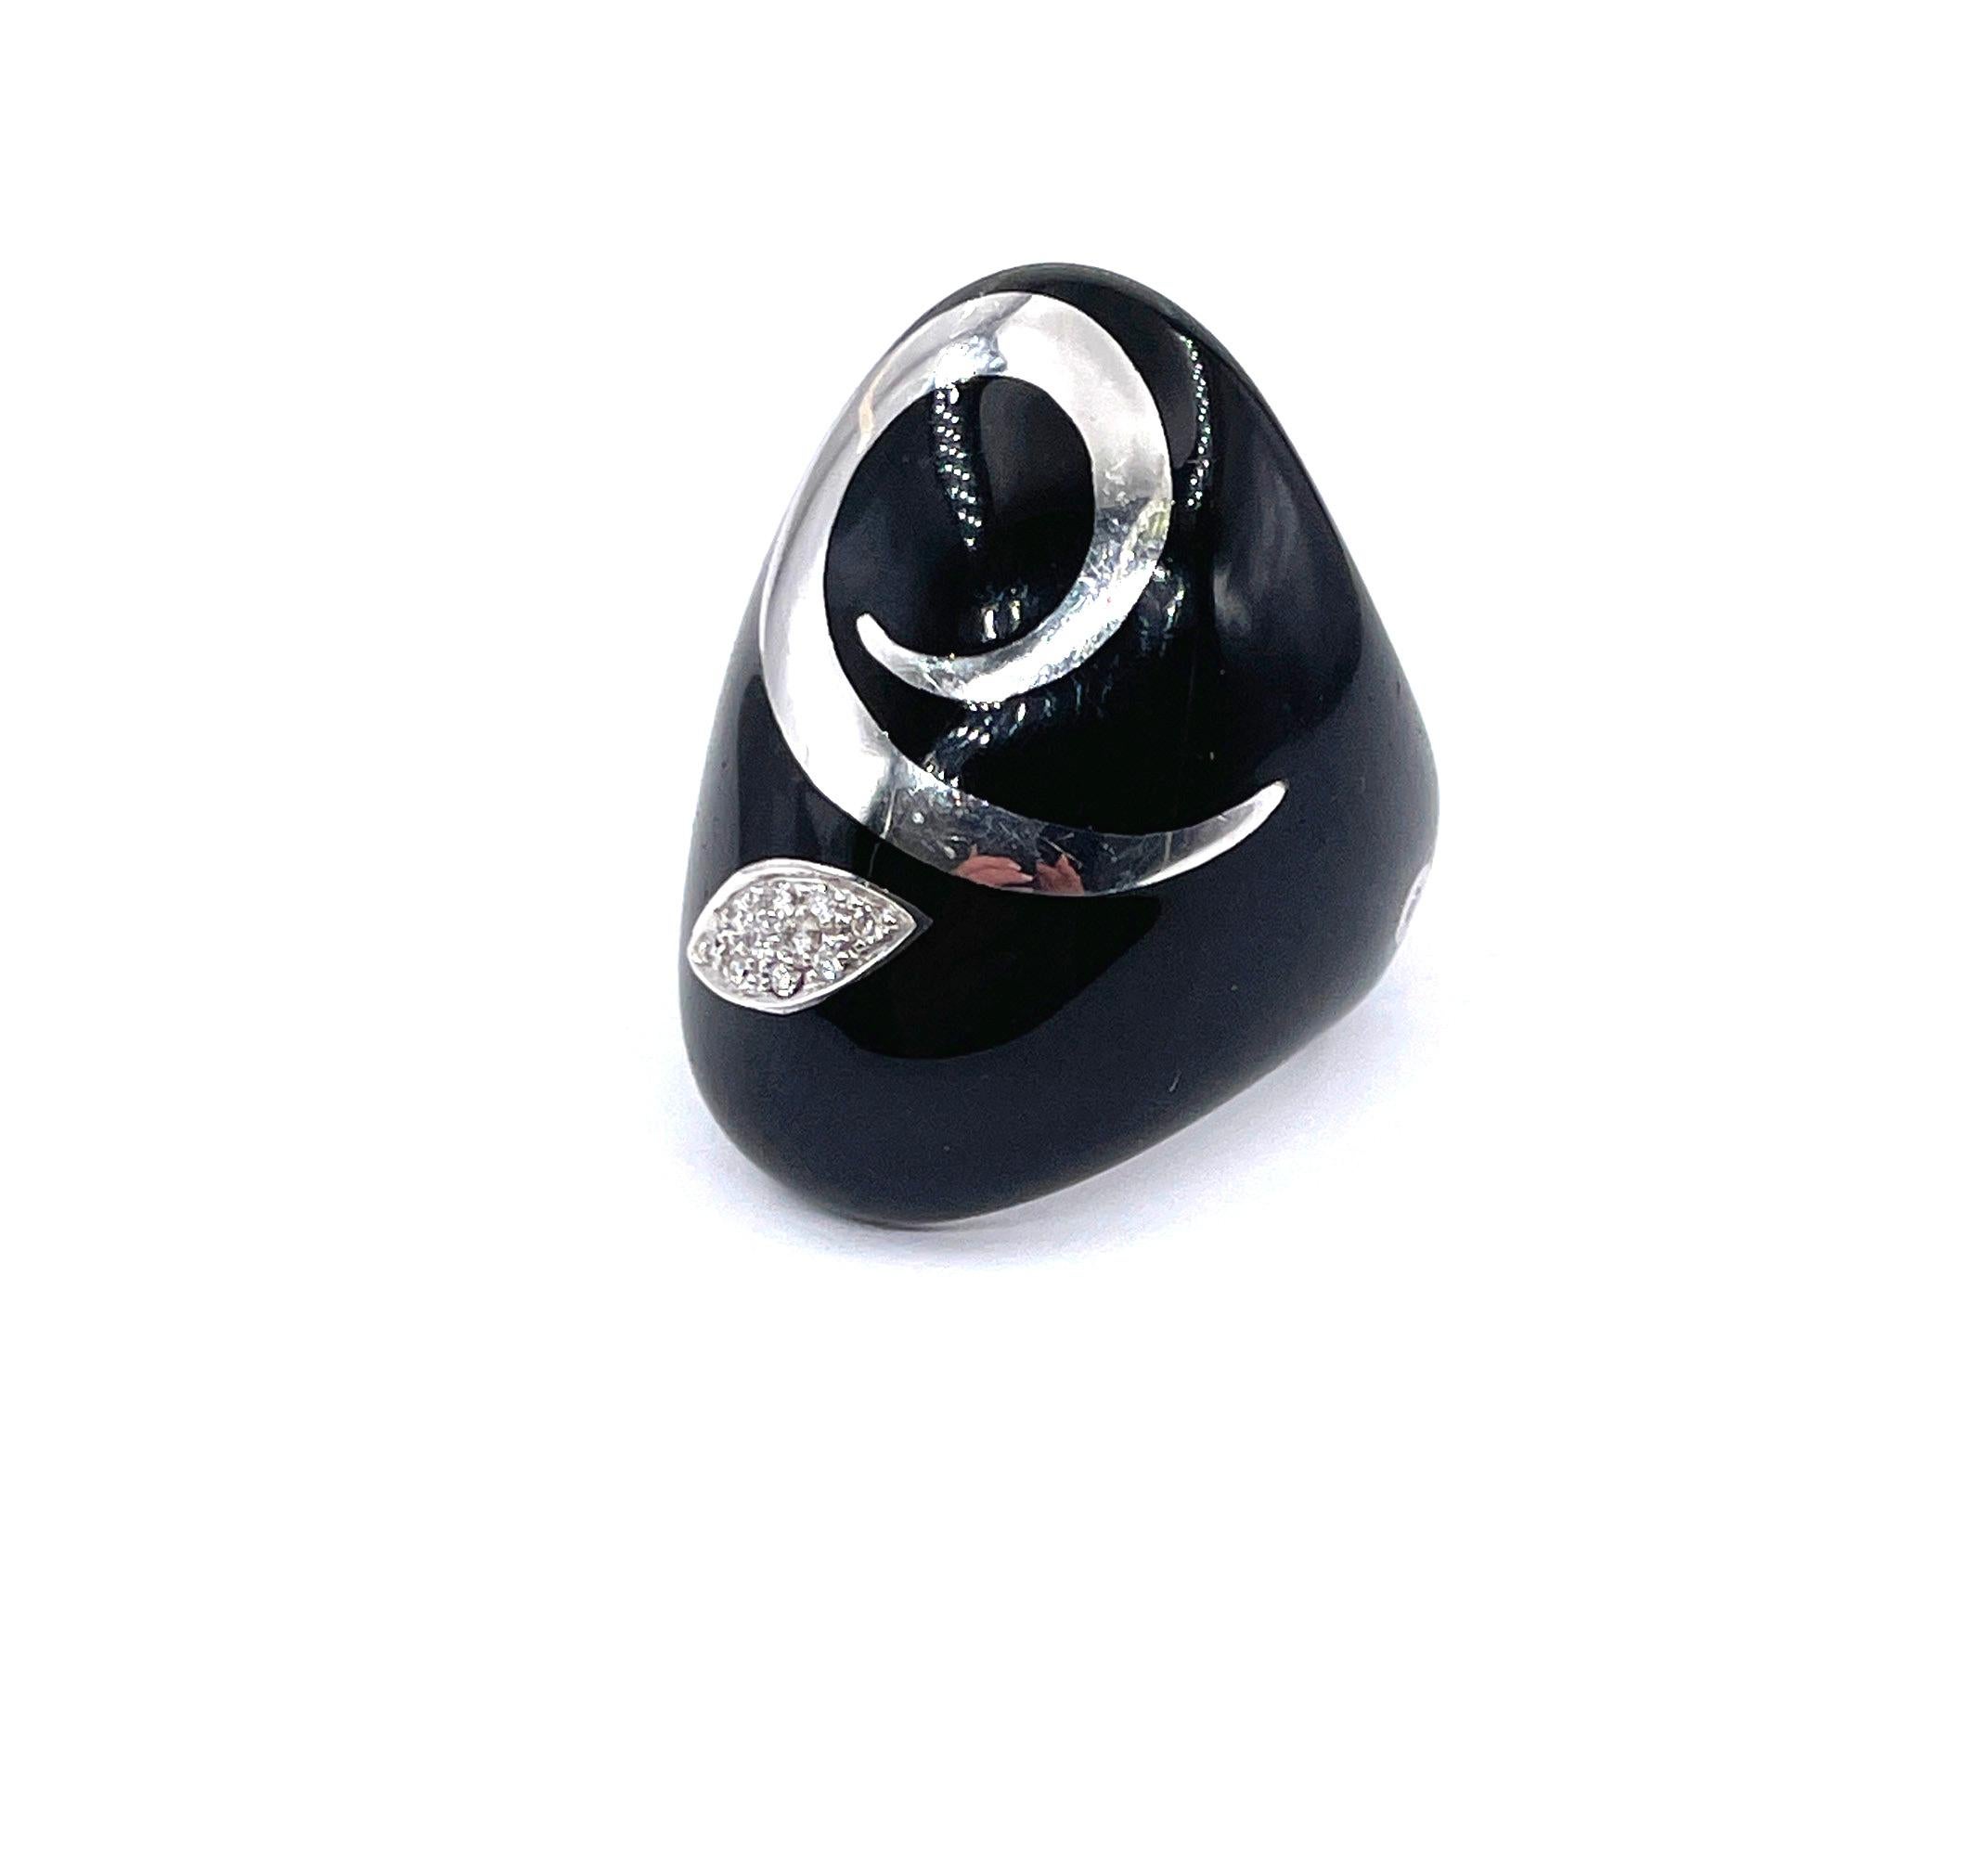 Estate Alessandro Fanfani 18 Karat White Gold and Black Enamel Diamond Ring
An unmistakable 100% Italian style speaking the language of women. The language of precious and contemporary materials, with soft and voluptuous shapes resembling the most